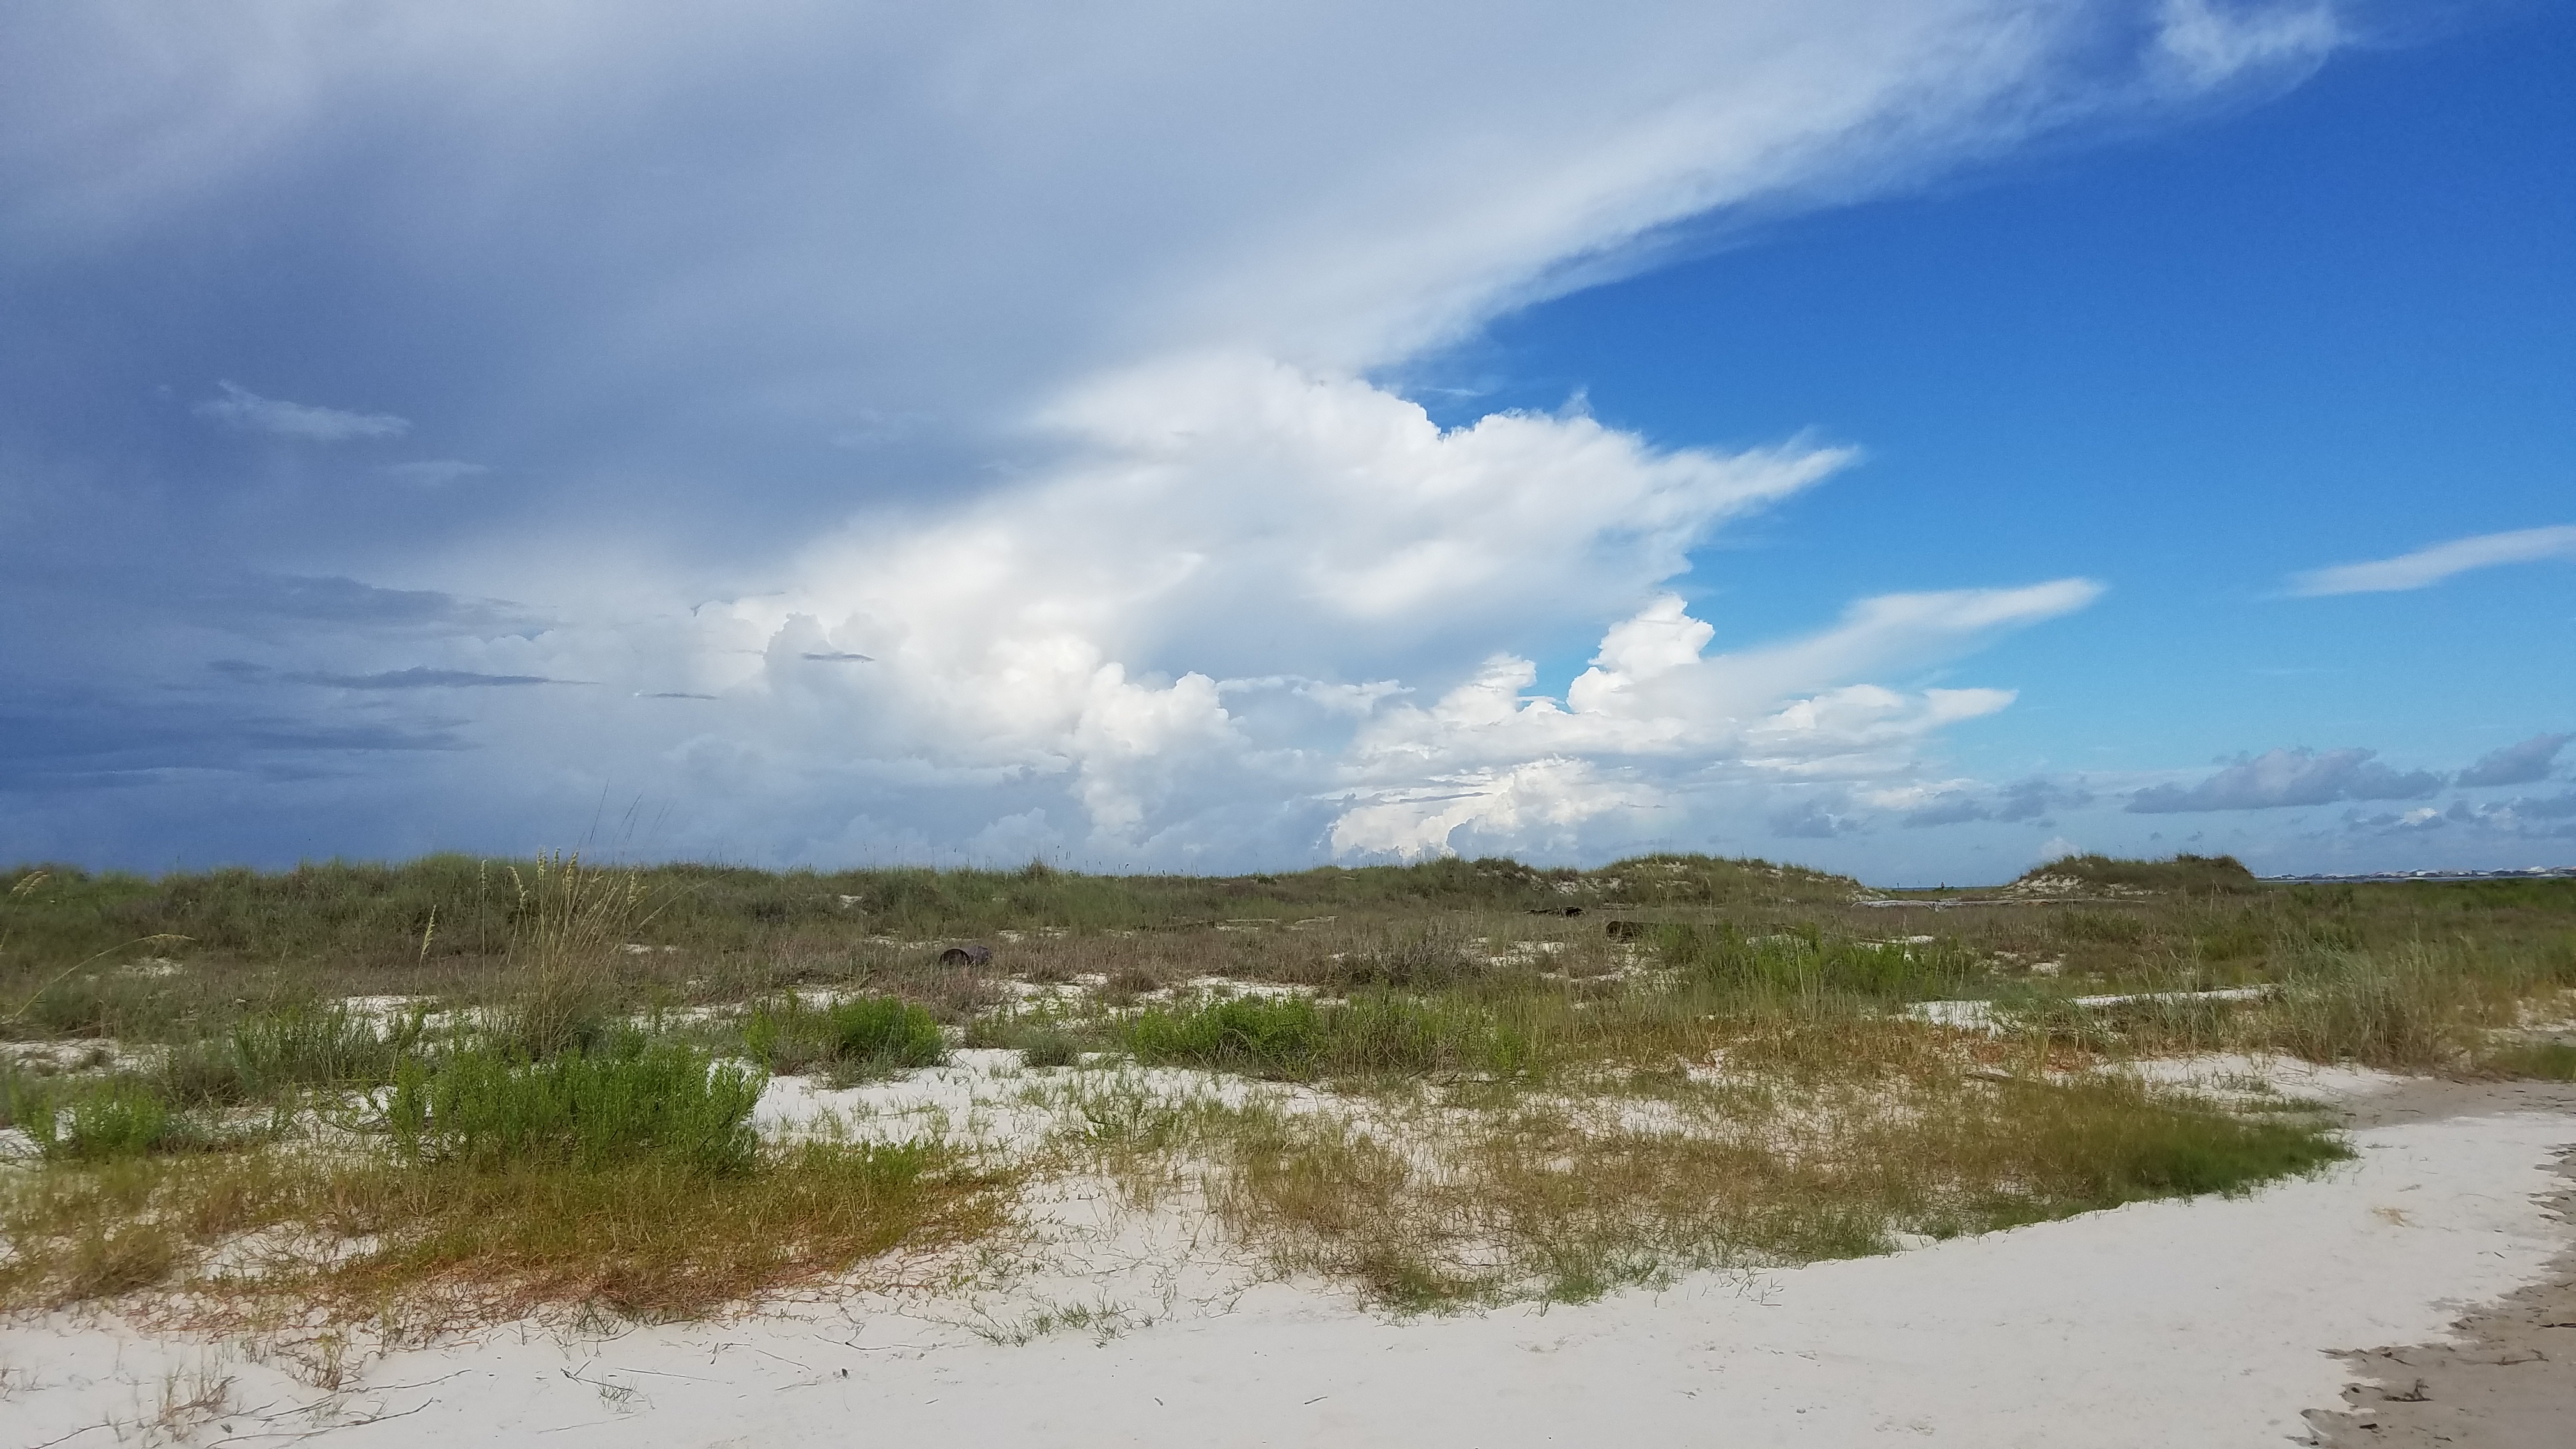 View of dunes from the beach with storm clouds in the background